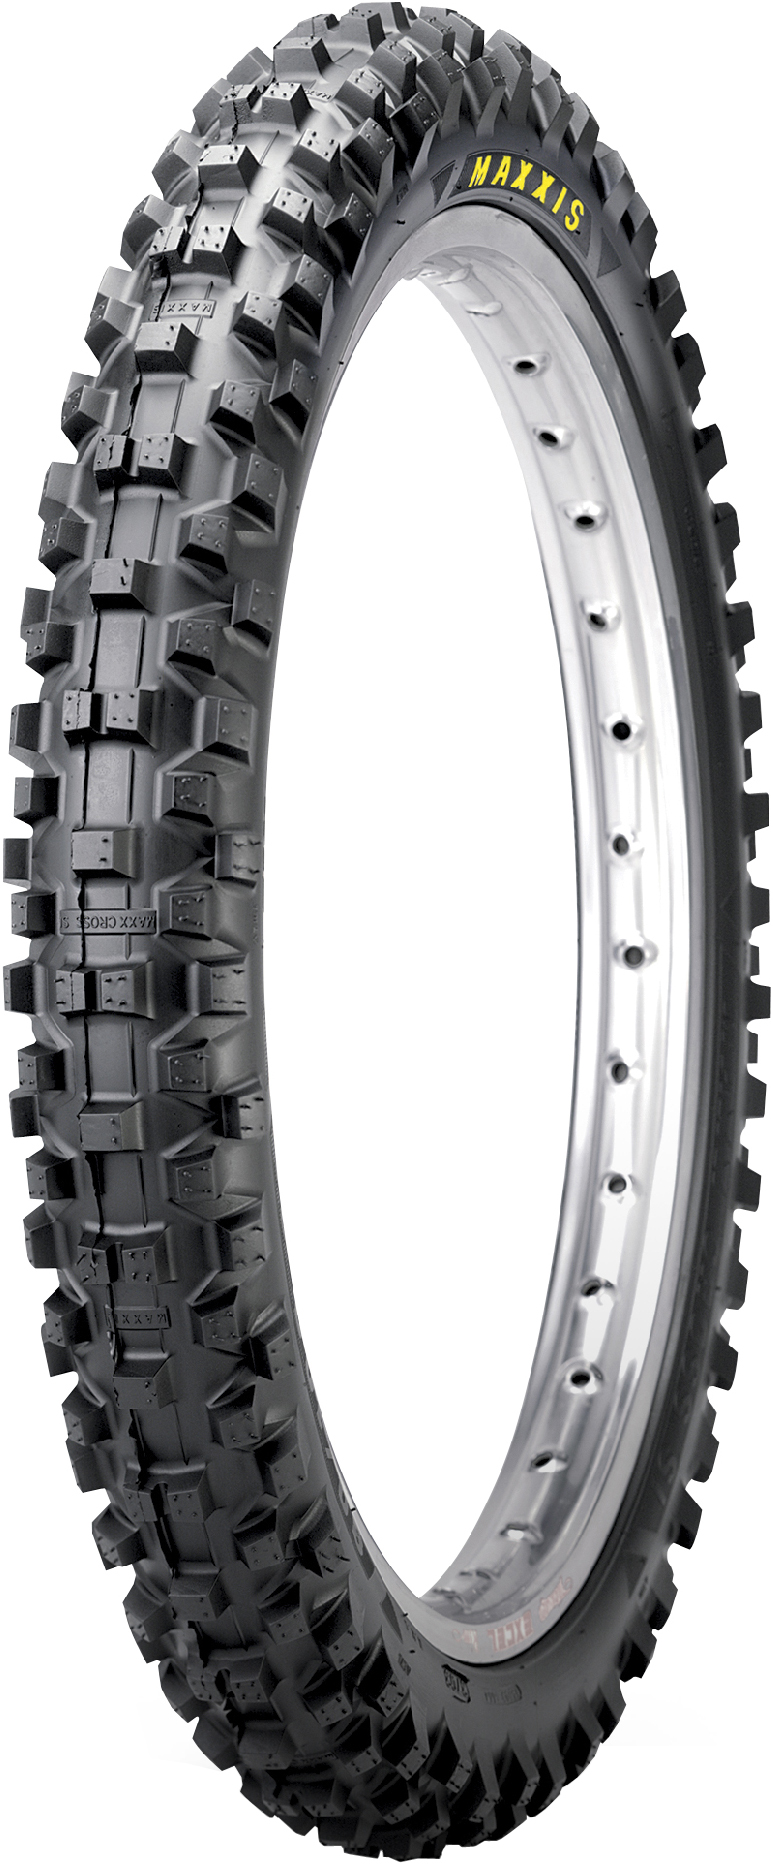 Anvelope traversale MAXXIS M7311 2.50 R10 33J